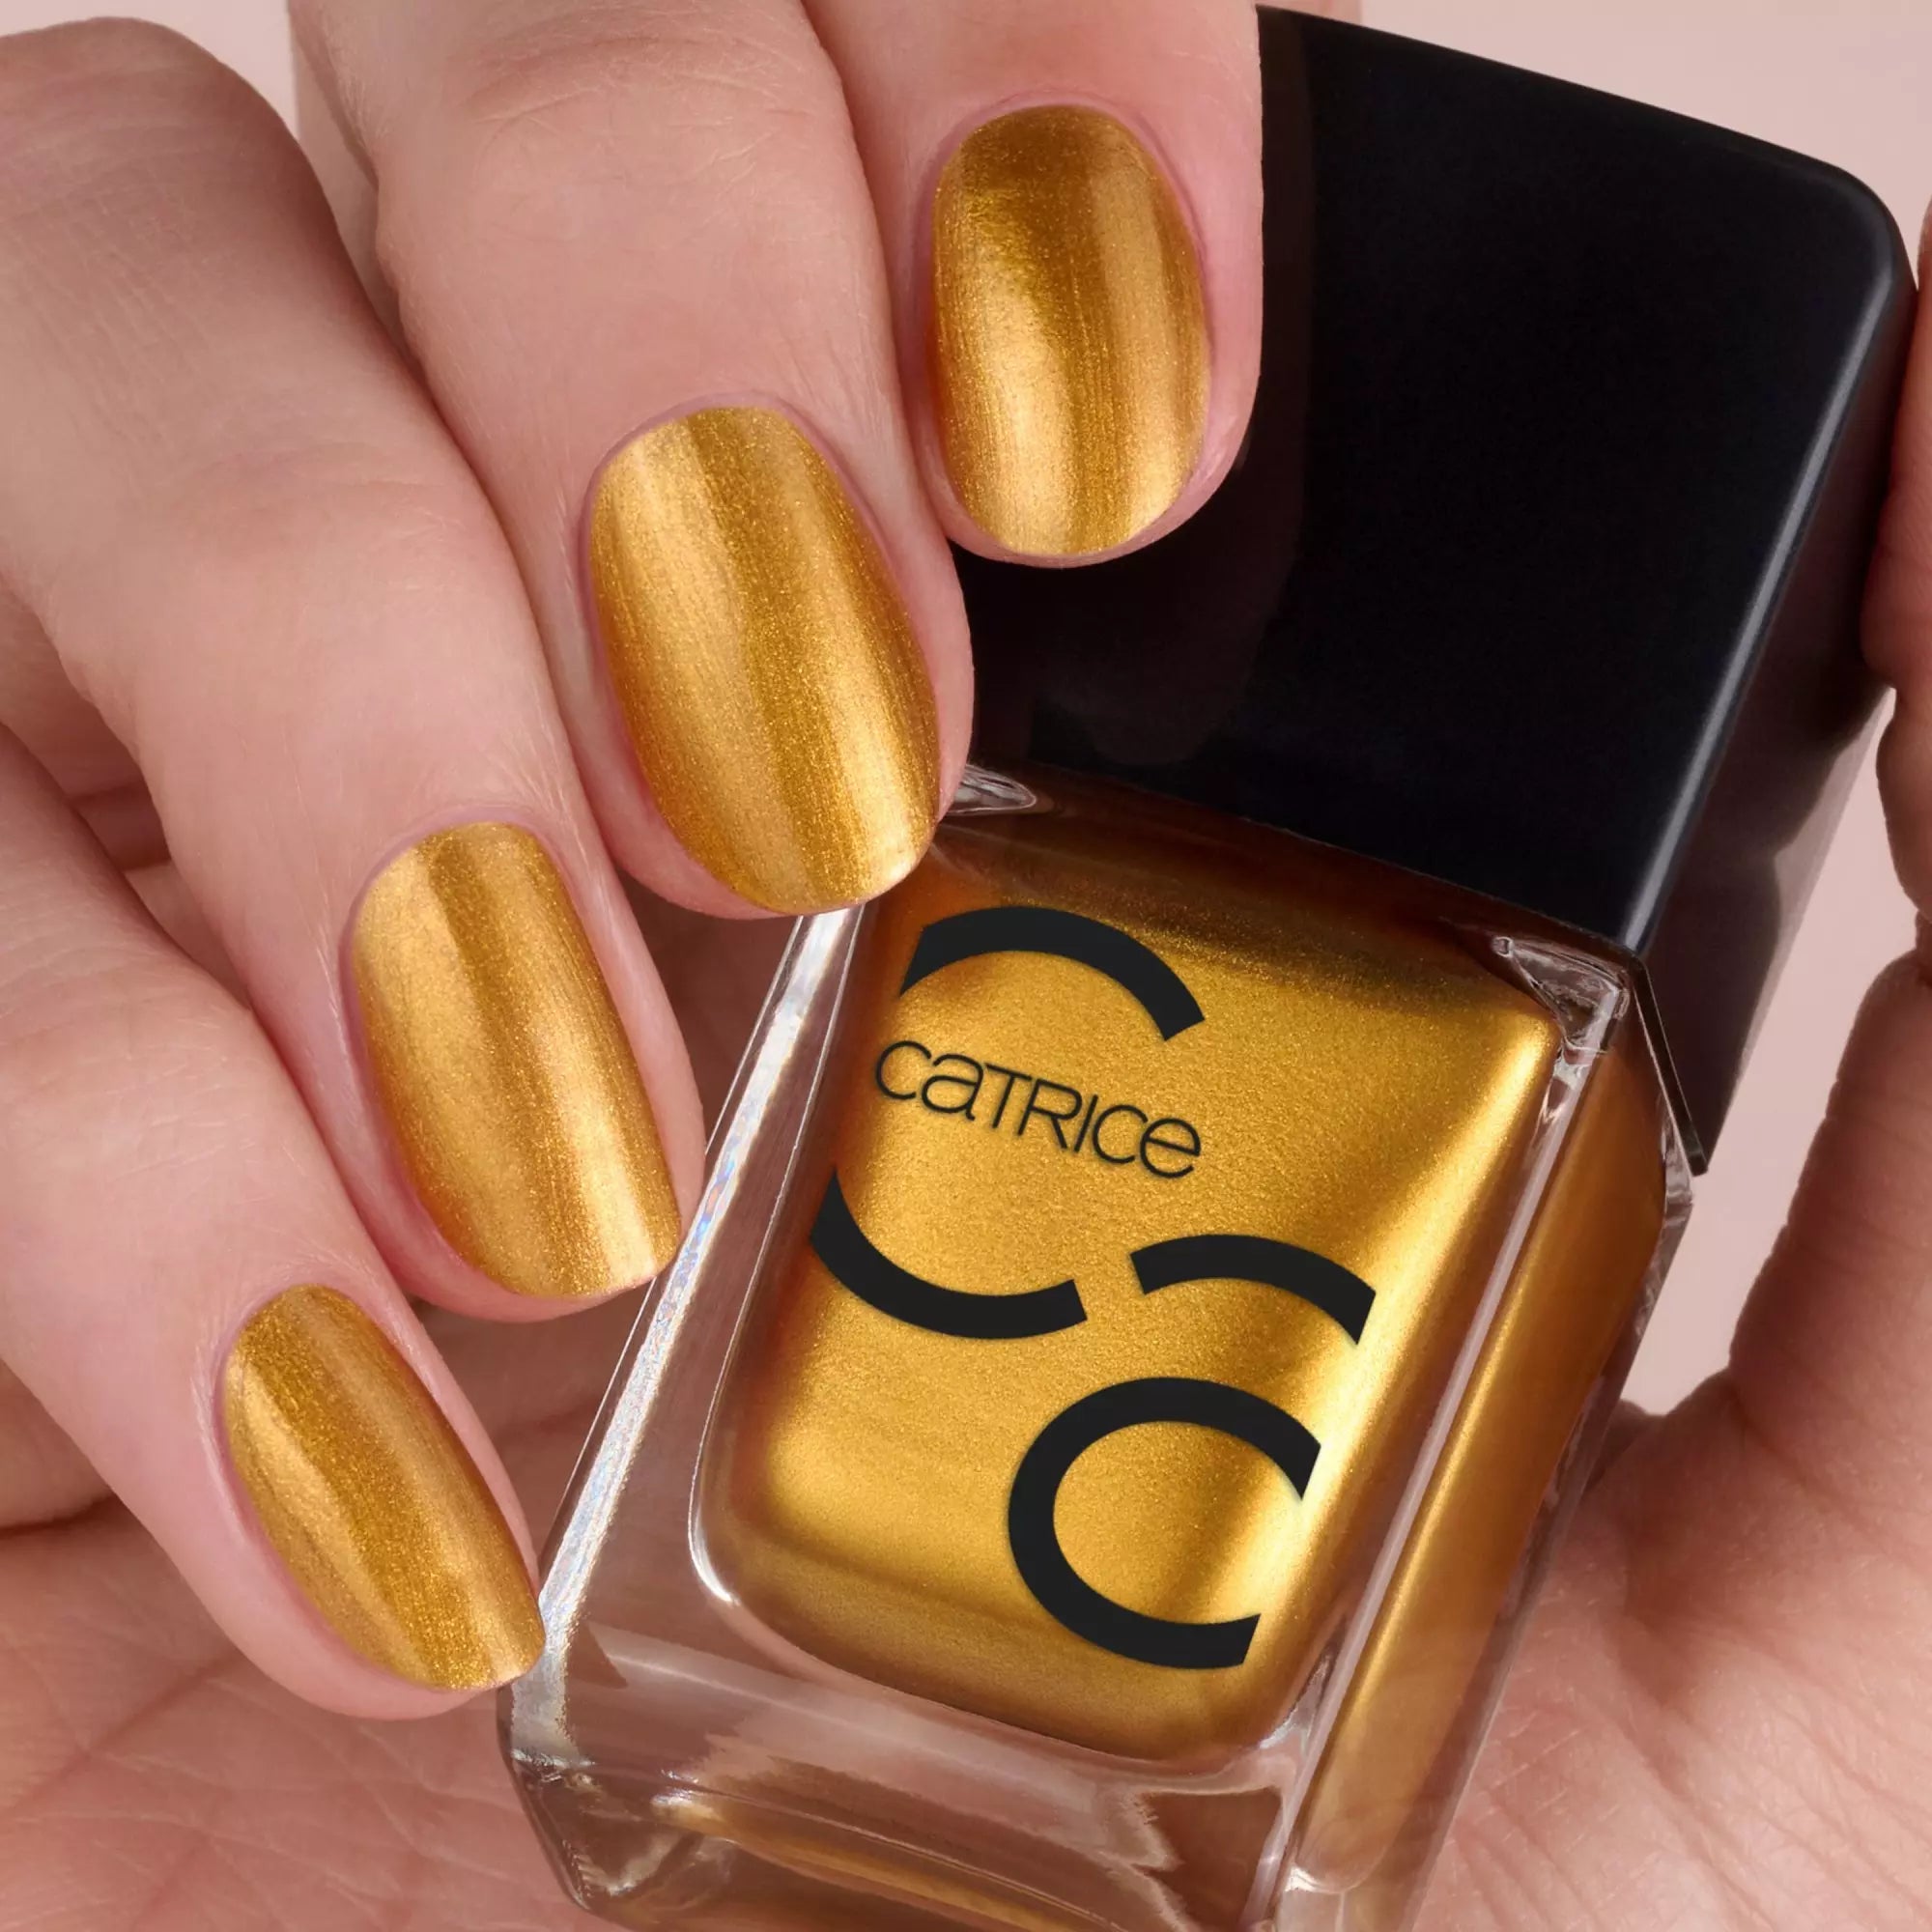 Gloss 156 Nail Gel Finish - ICONAILS Ultimate Lacquer Catrice Gold Polish